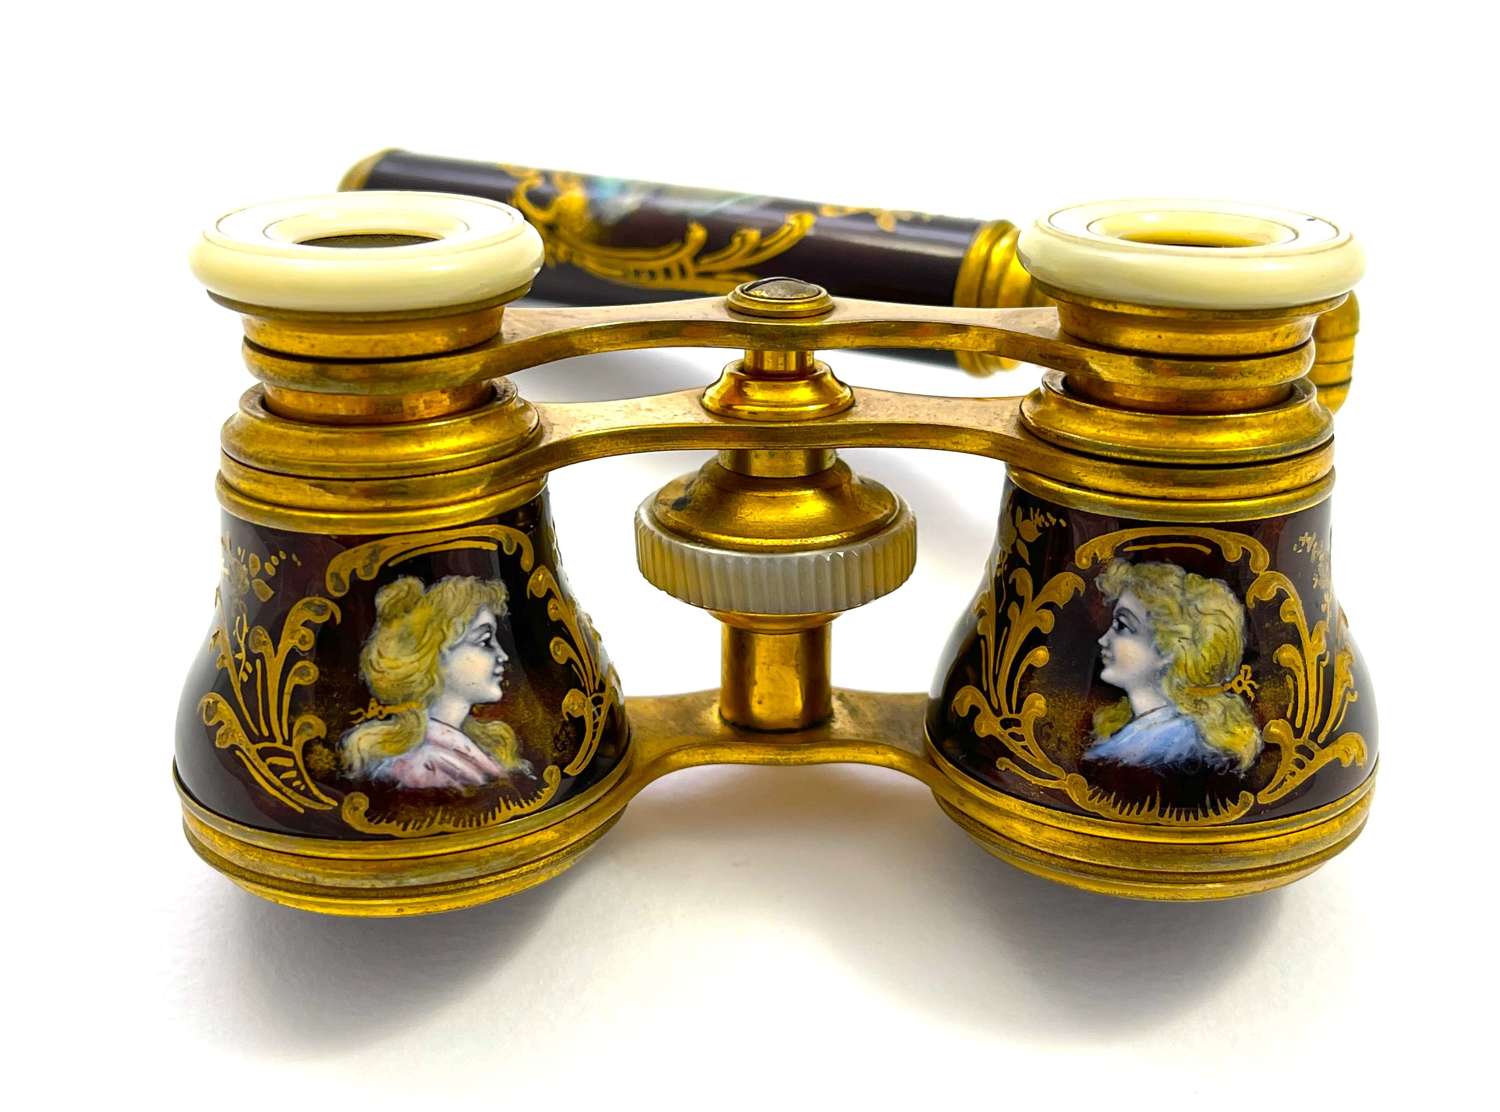 An Exceptional Pair of Antique French Enamel Opera Glasses